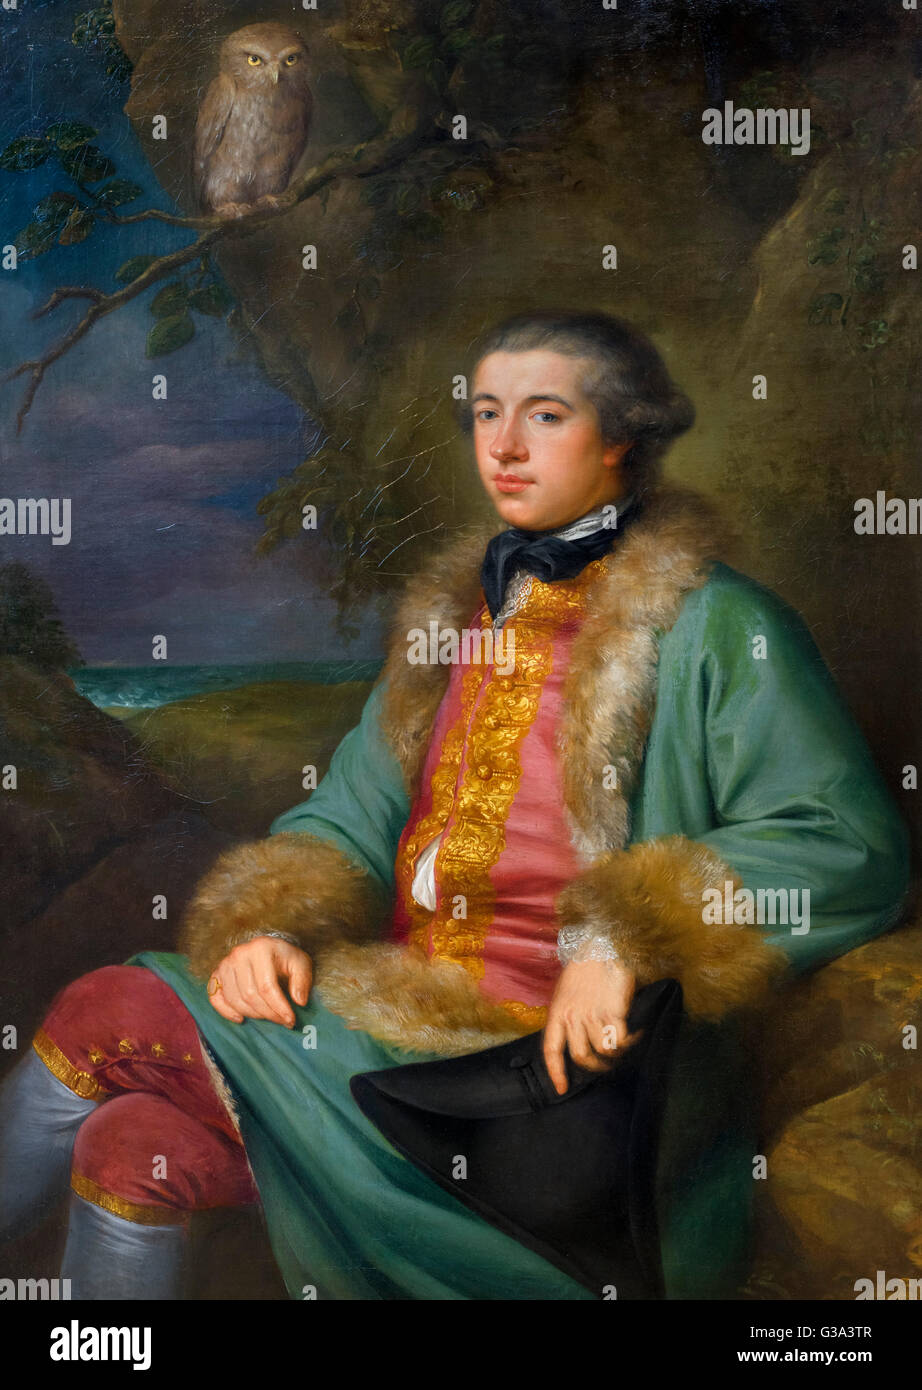 James Boswell, (1740–1795), an 18th century Scottish biographer and diarist, best known for his biography of Samuel Johnson. Portrait by George Willison, oil on canvas, 1765. Stock Photo